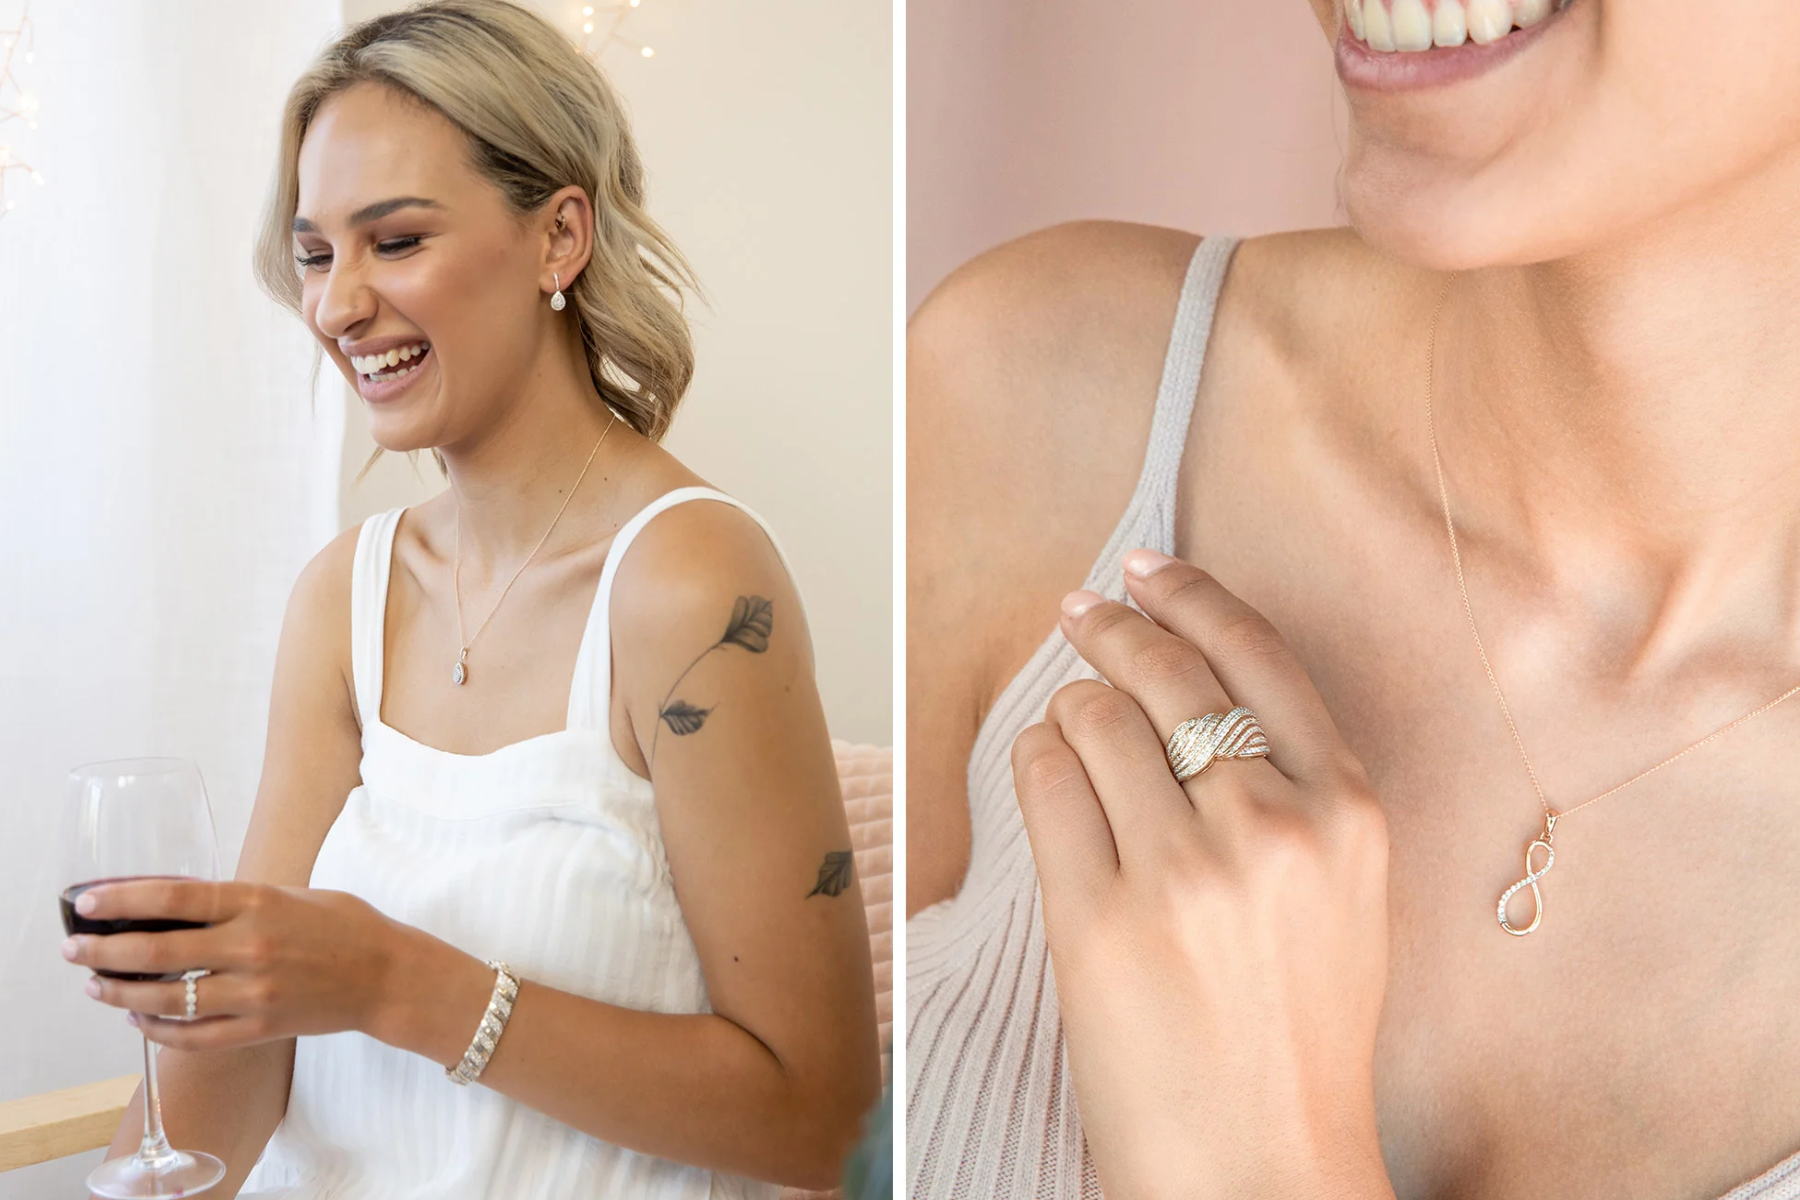 Two separate women wear diamond jewelry that is both basic and lovely